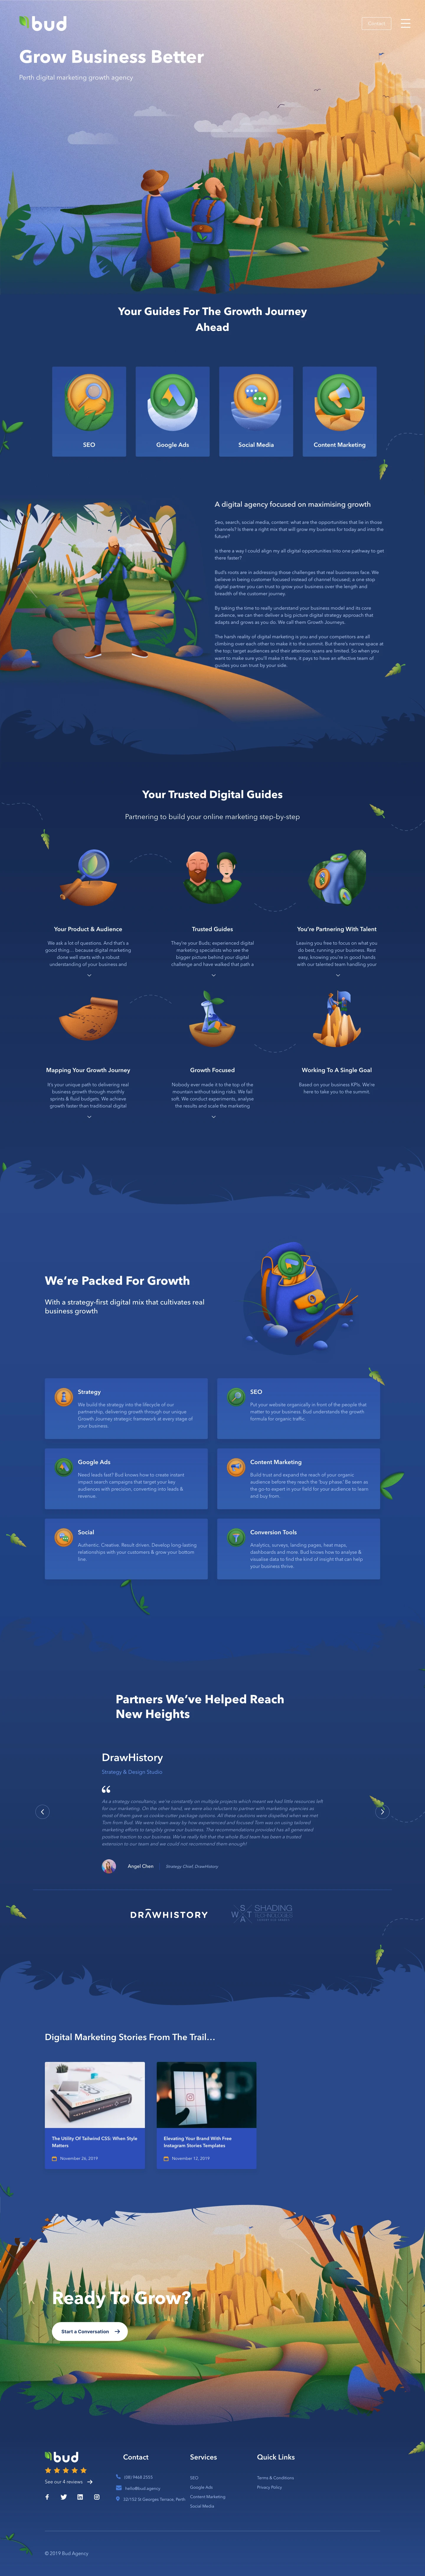 Bud Agency Landing Page Example: A digital agency focused on maximising growth.